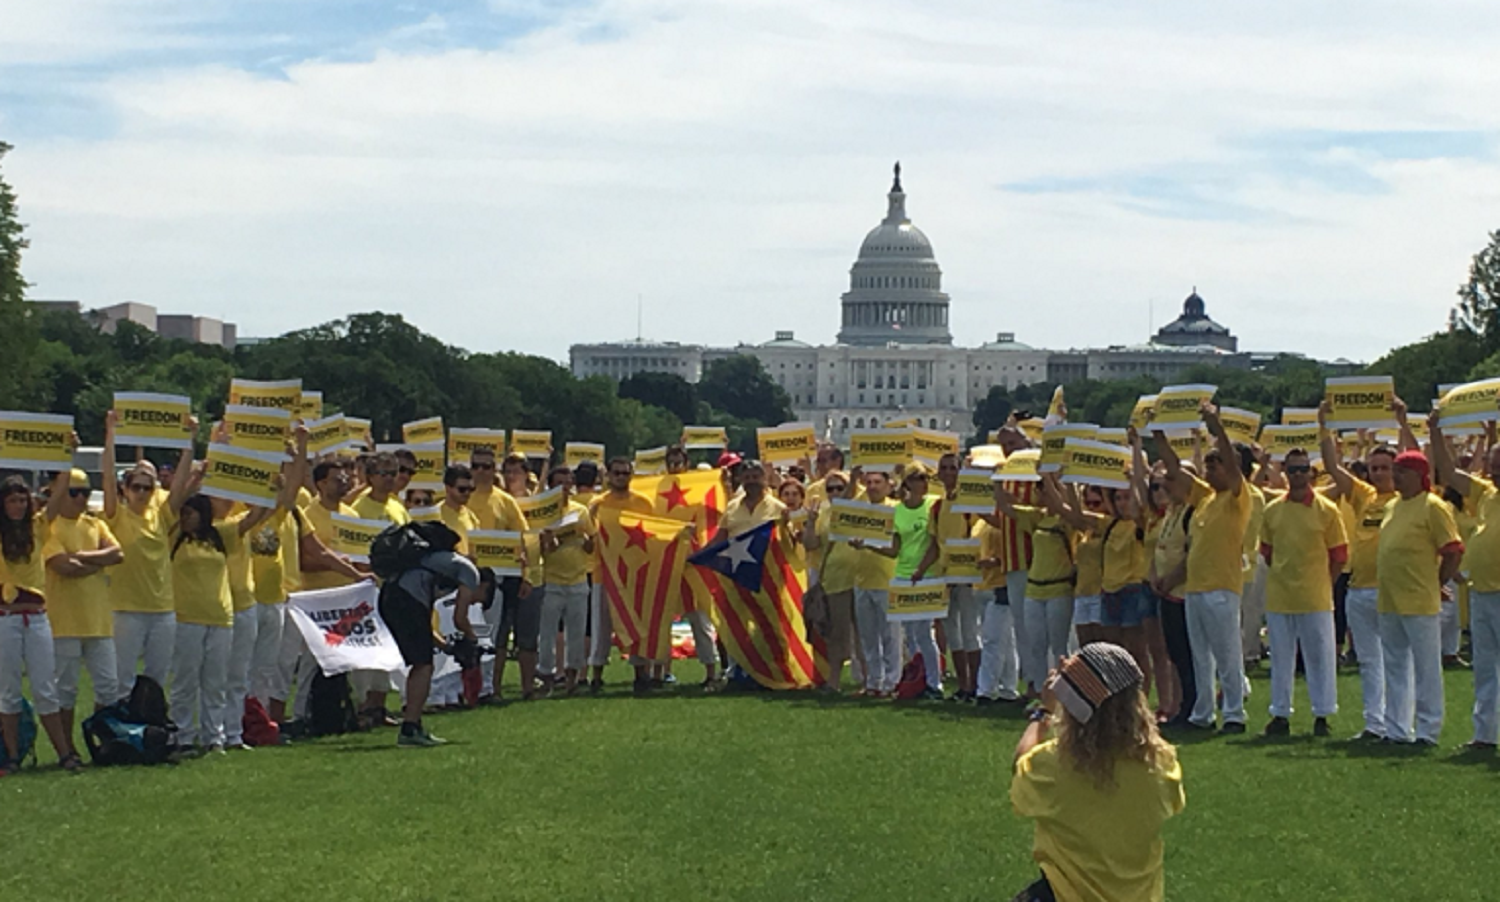 Call to free Catalan political prisoners reaches heart of Washington DC